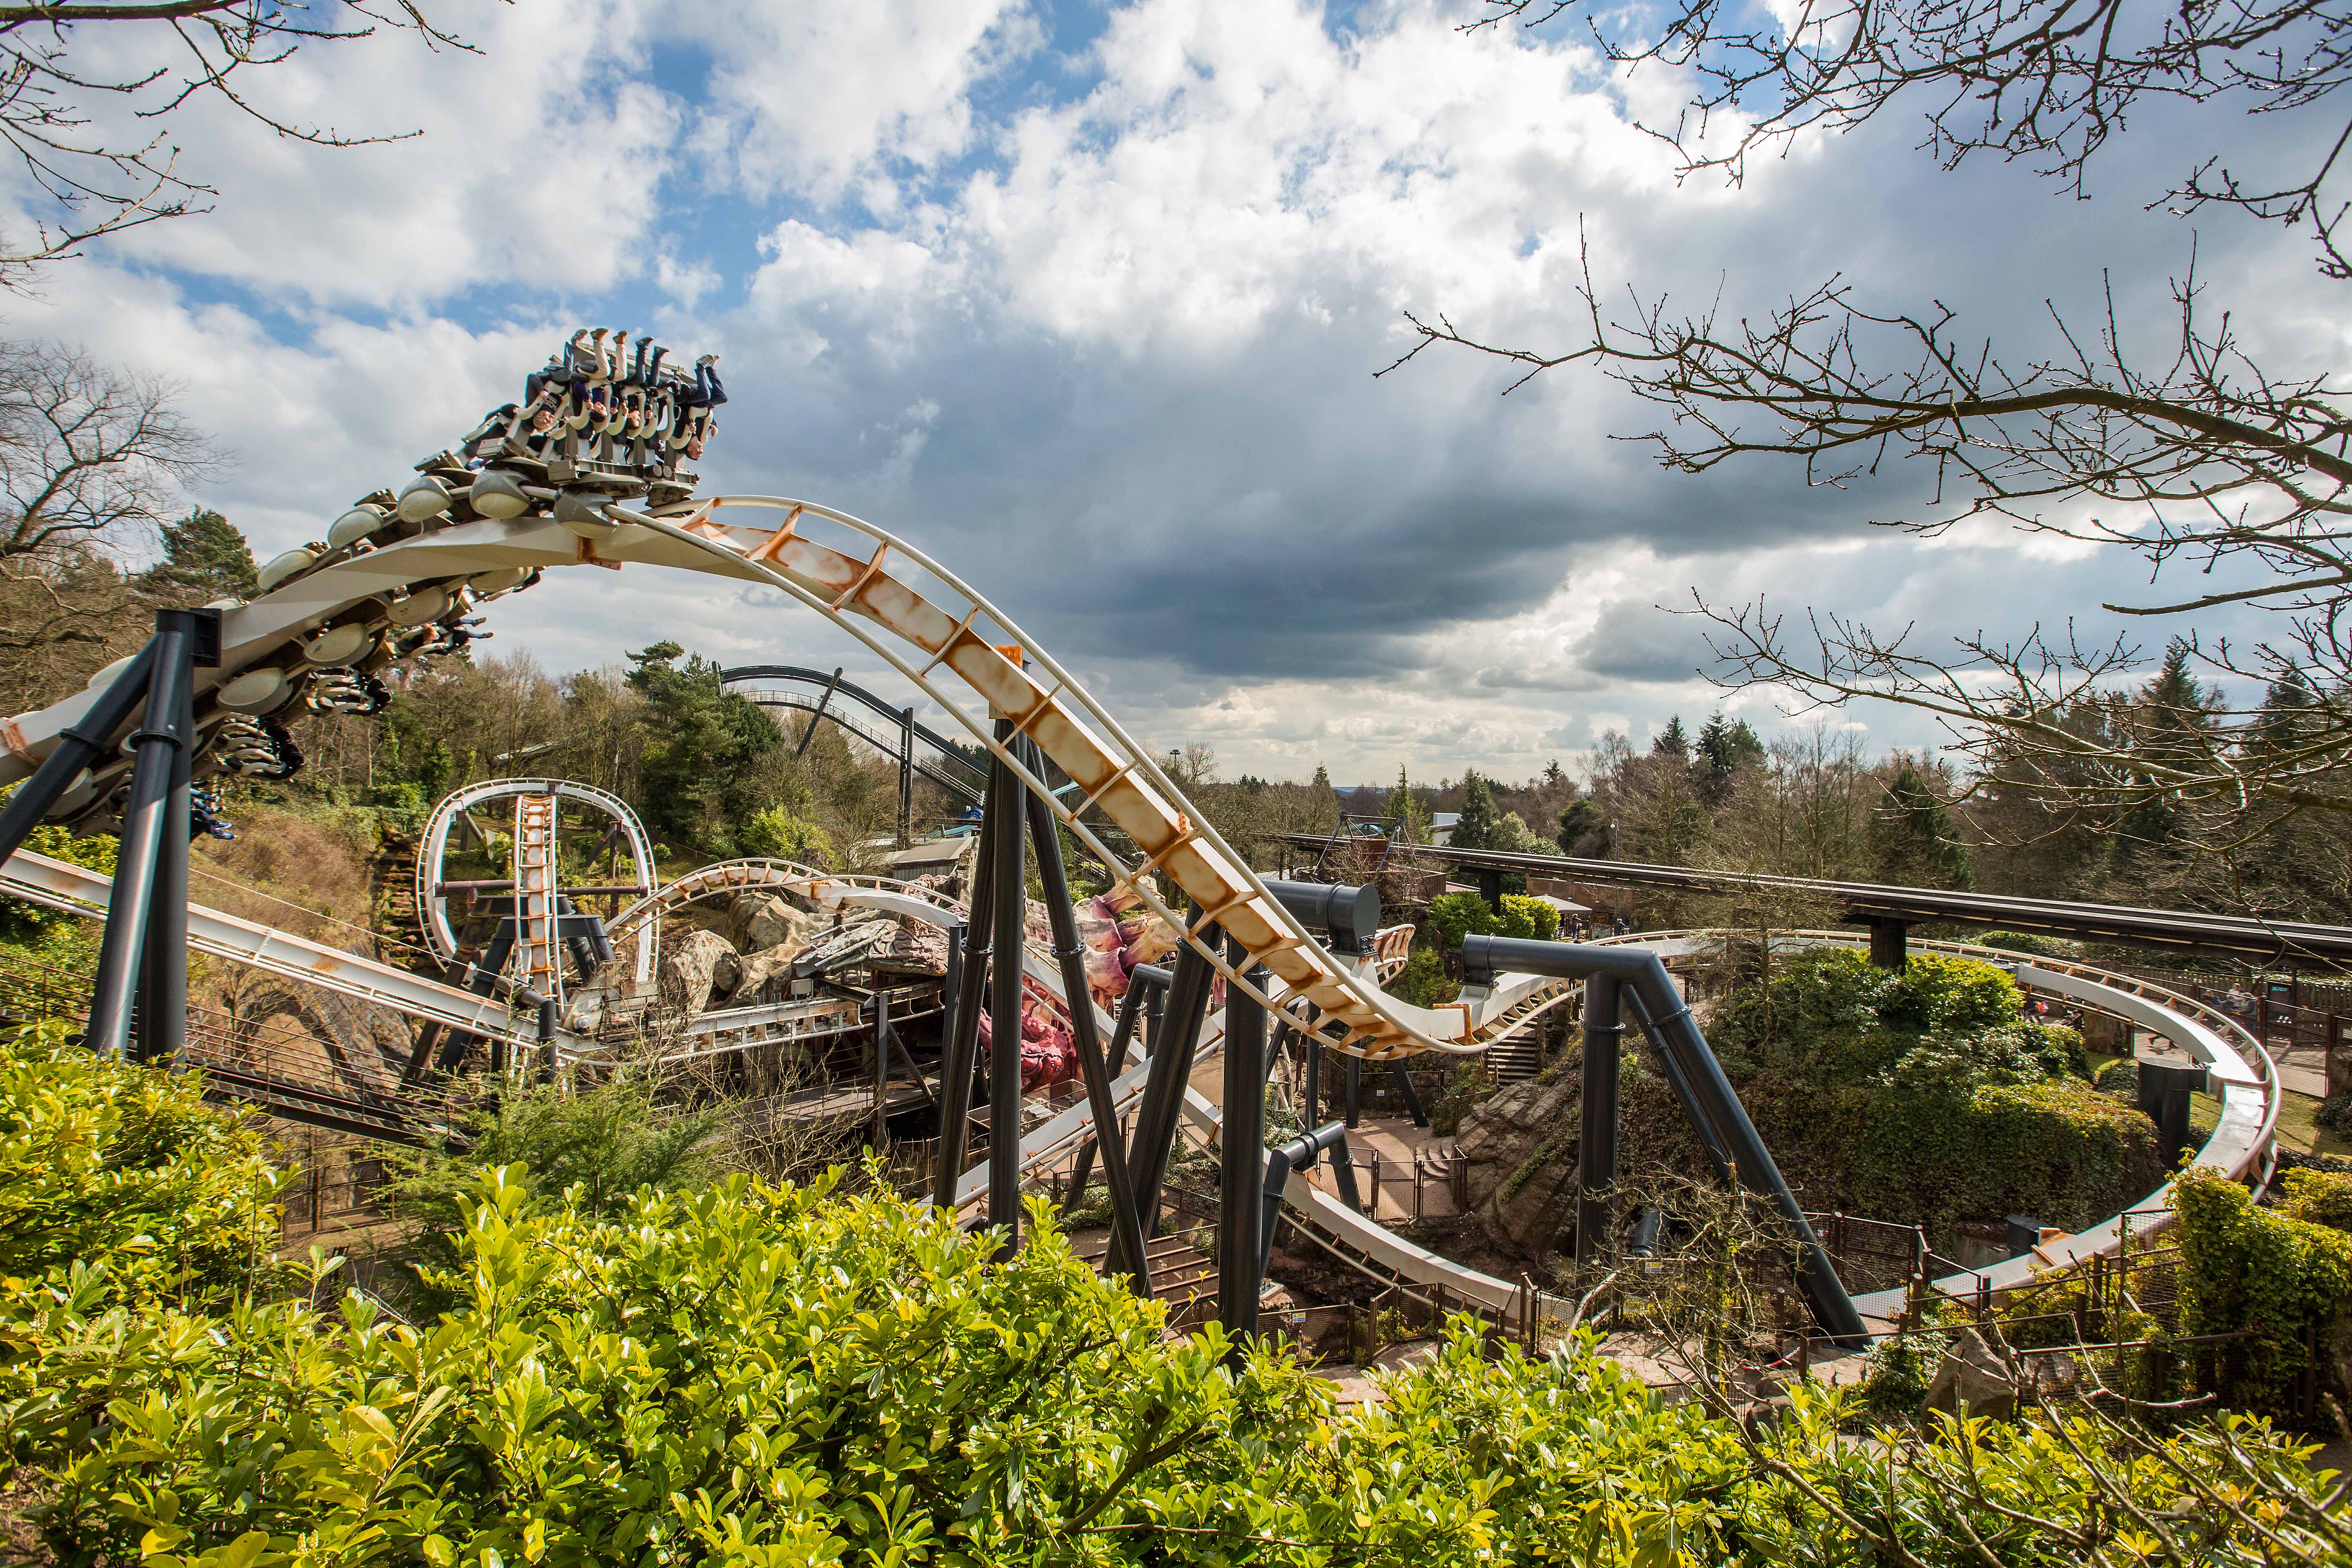 Alton Towers has a 'treetop rule' that no one knows about